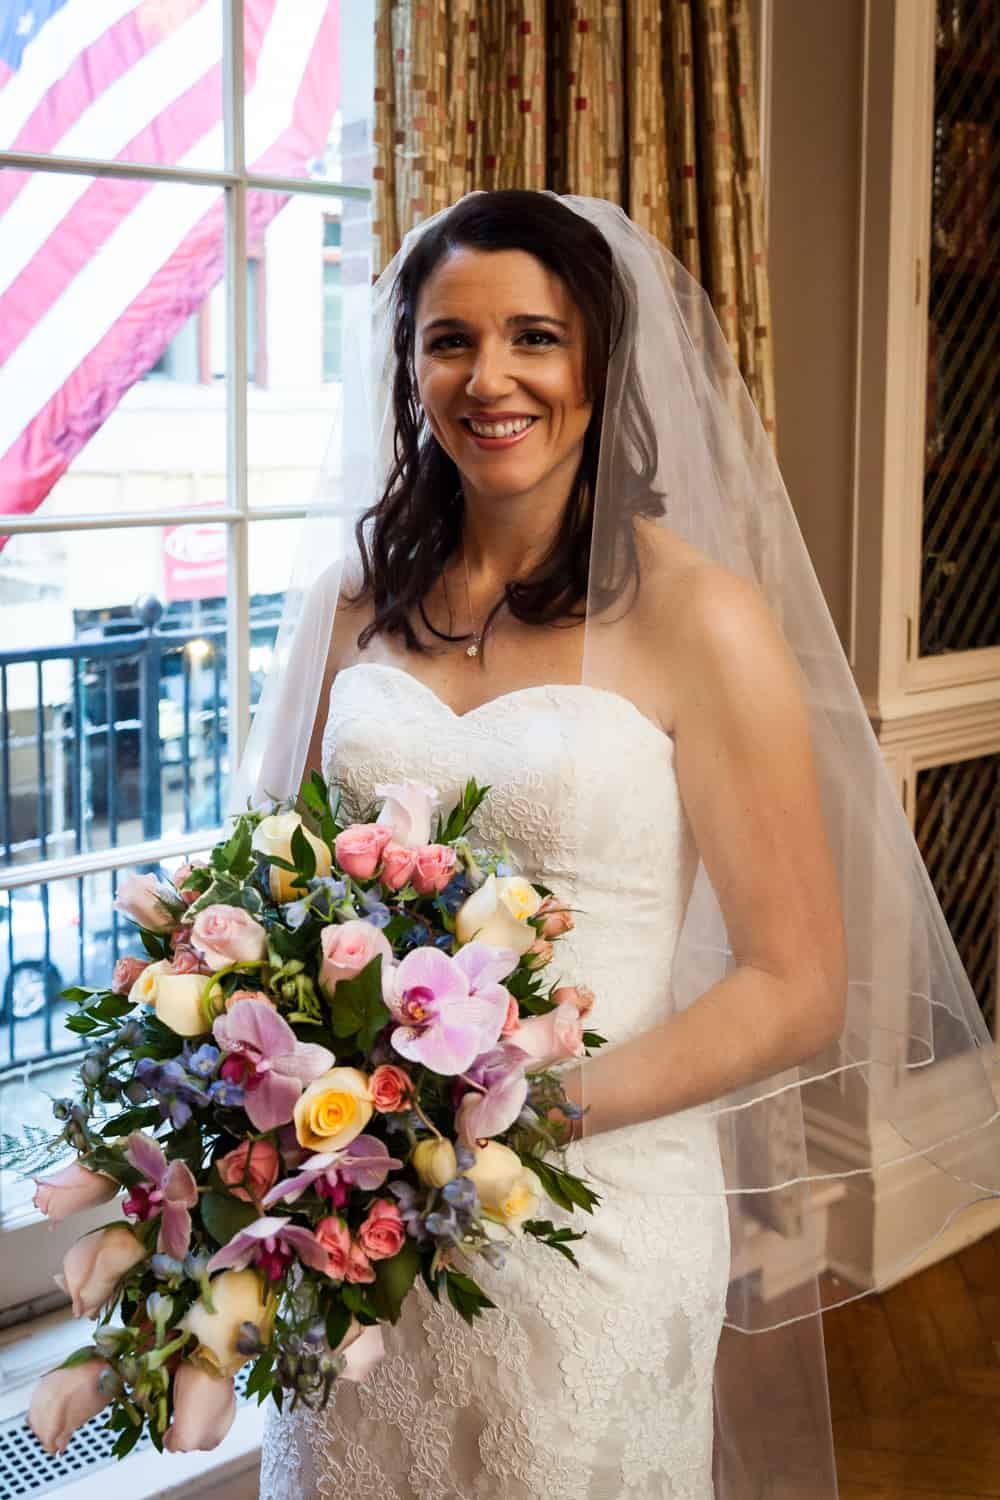 Bride holding bouquet by window for an article on the mysteries of photo editing